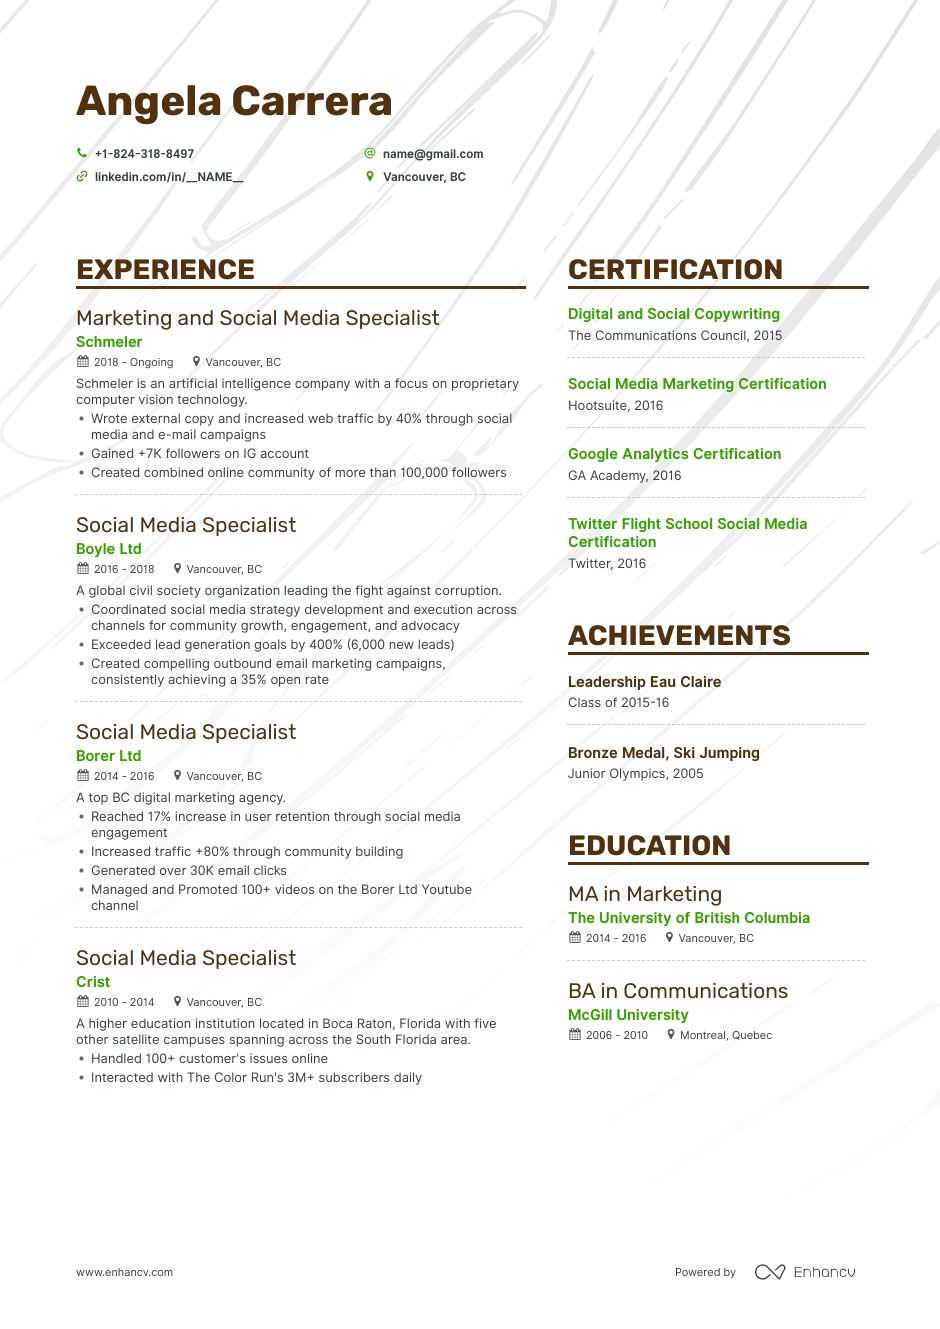 Describe Your Computer Skills Resume social Media Sample social Media Manager Resume Examples & Guide for 2022 (layout …